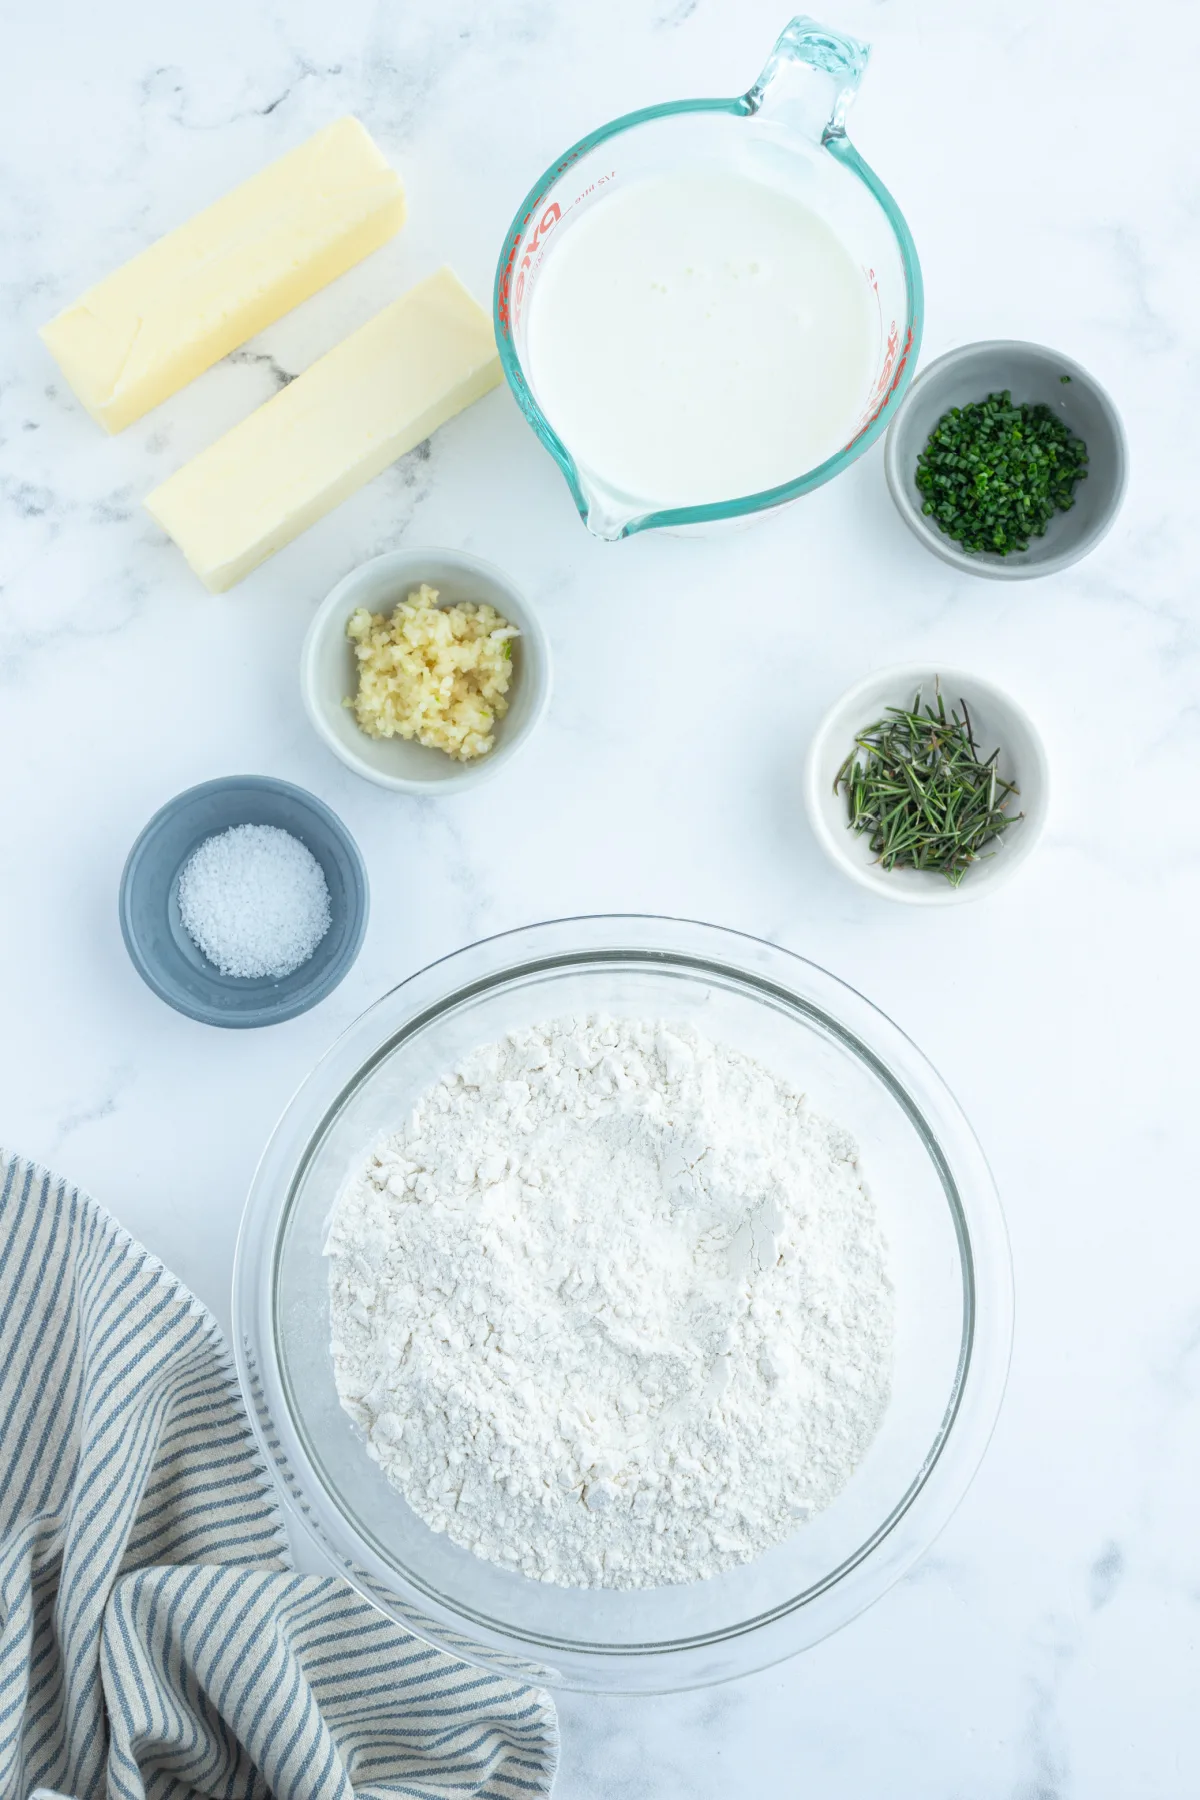 ingredients displayed for making rosemary garlic butter bath biscuits